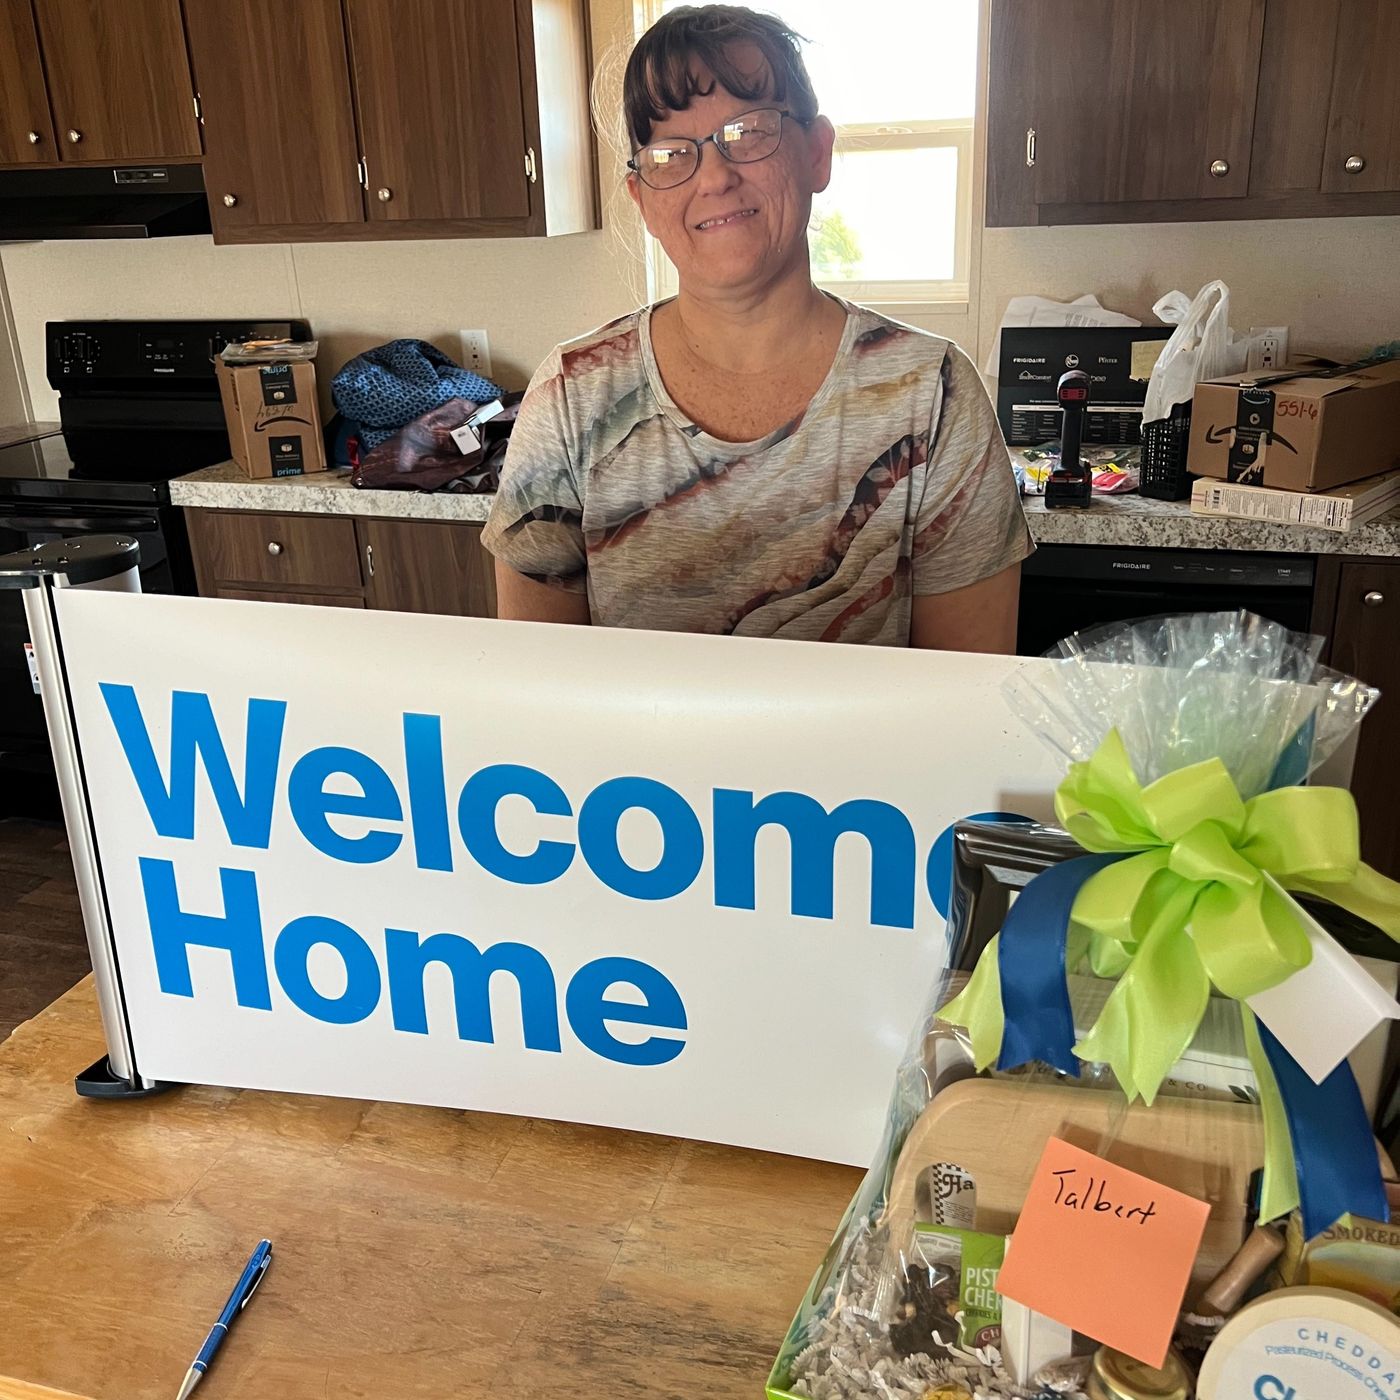 LINDA T. welcome home image